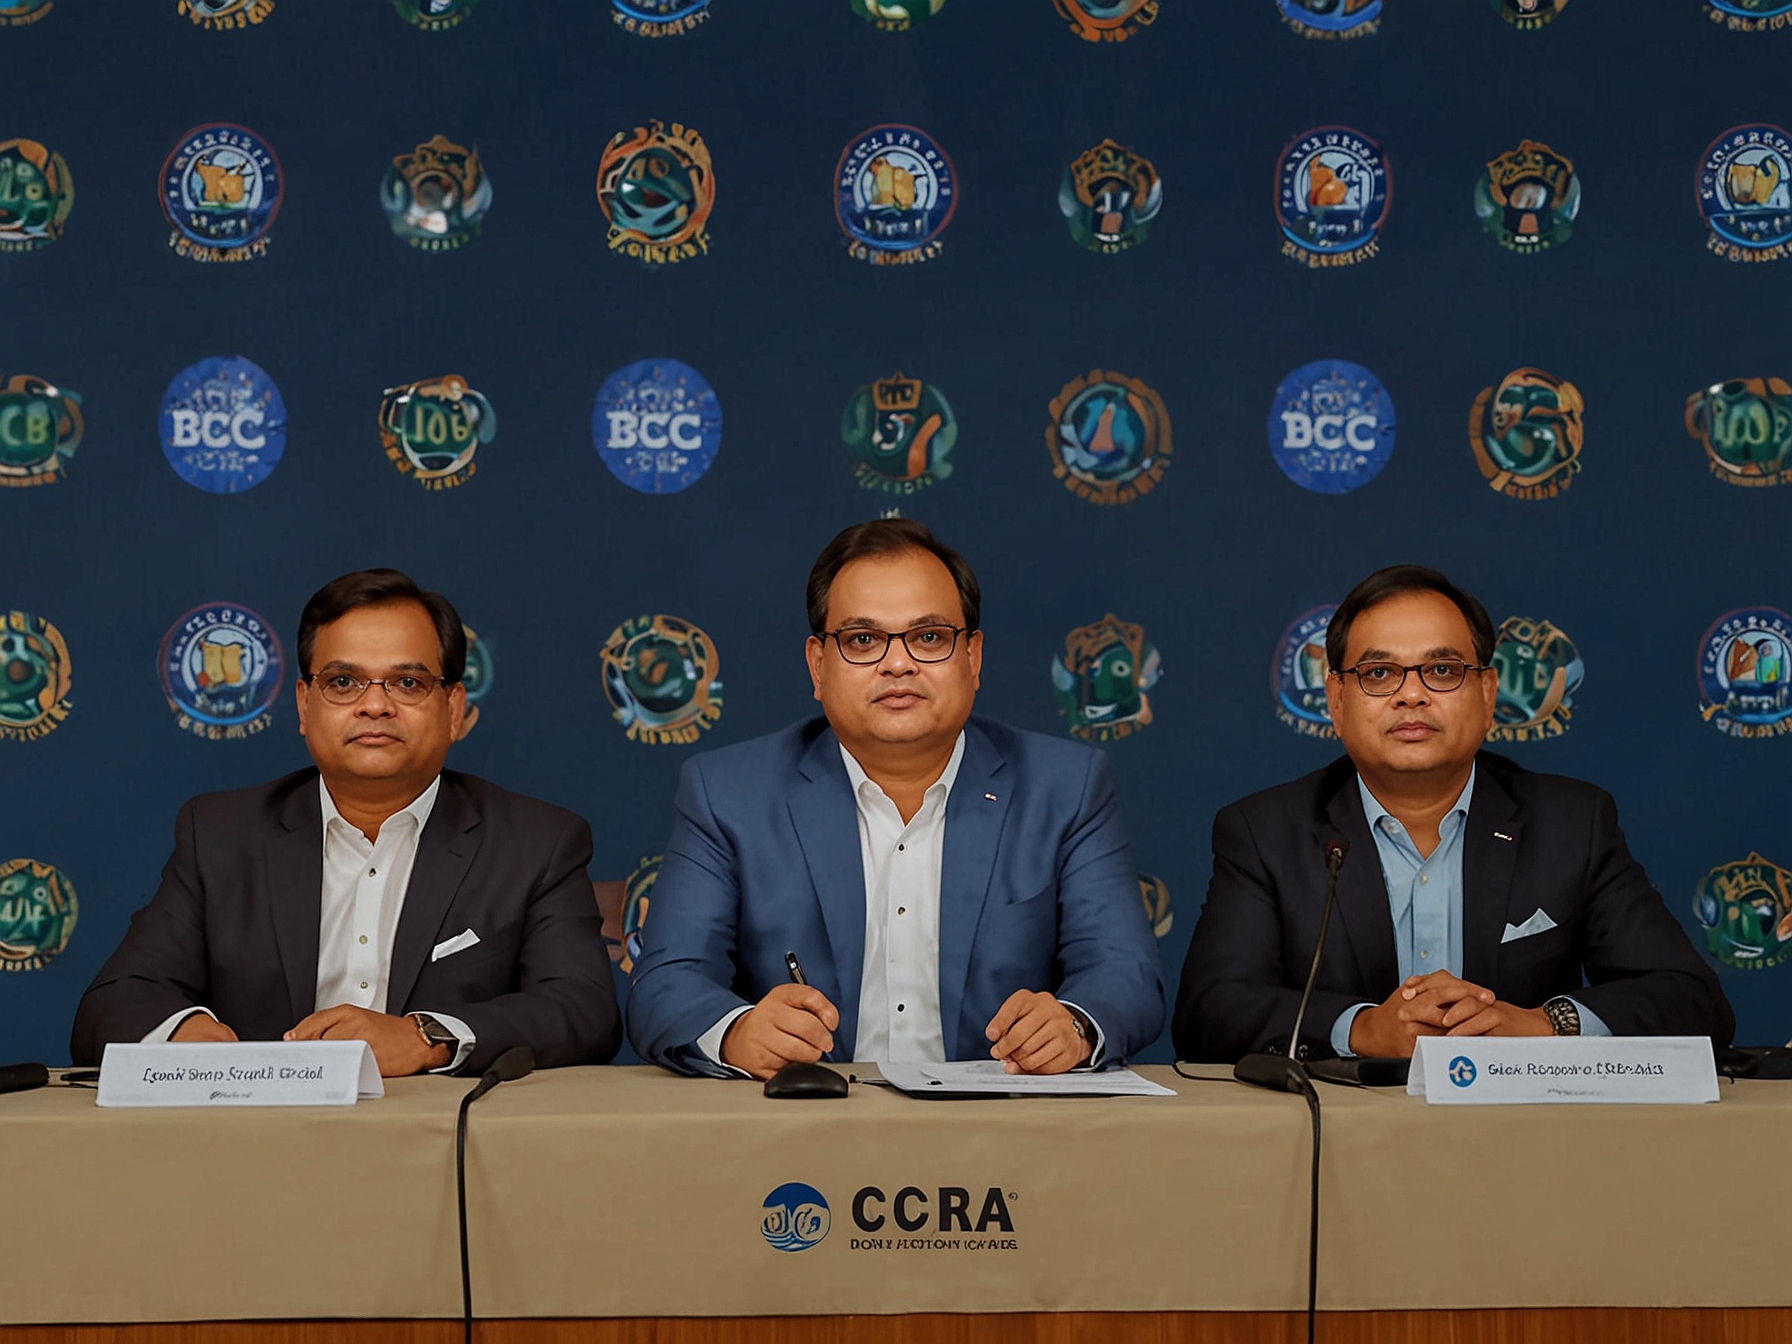 Jay Shah, BCCI Secretary, addressing the media about the confirmation of Team India's new head coach. This image captures the moment of the key announcement, signifying a new era in Indian cricket.